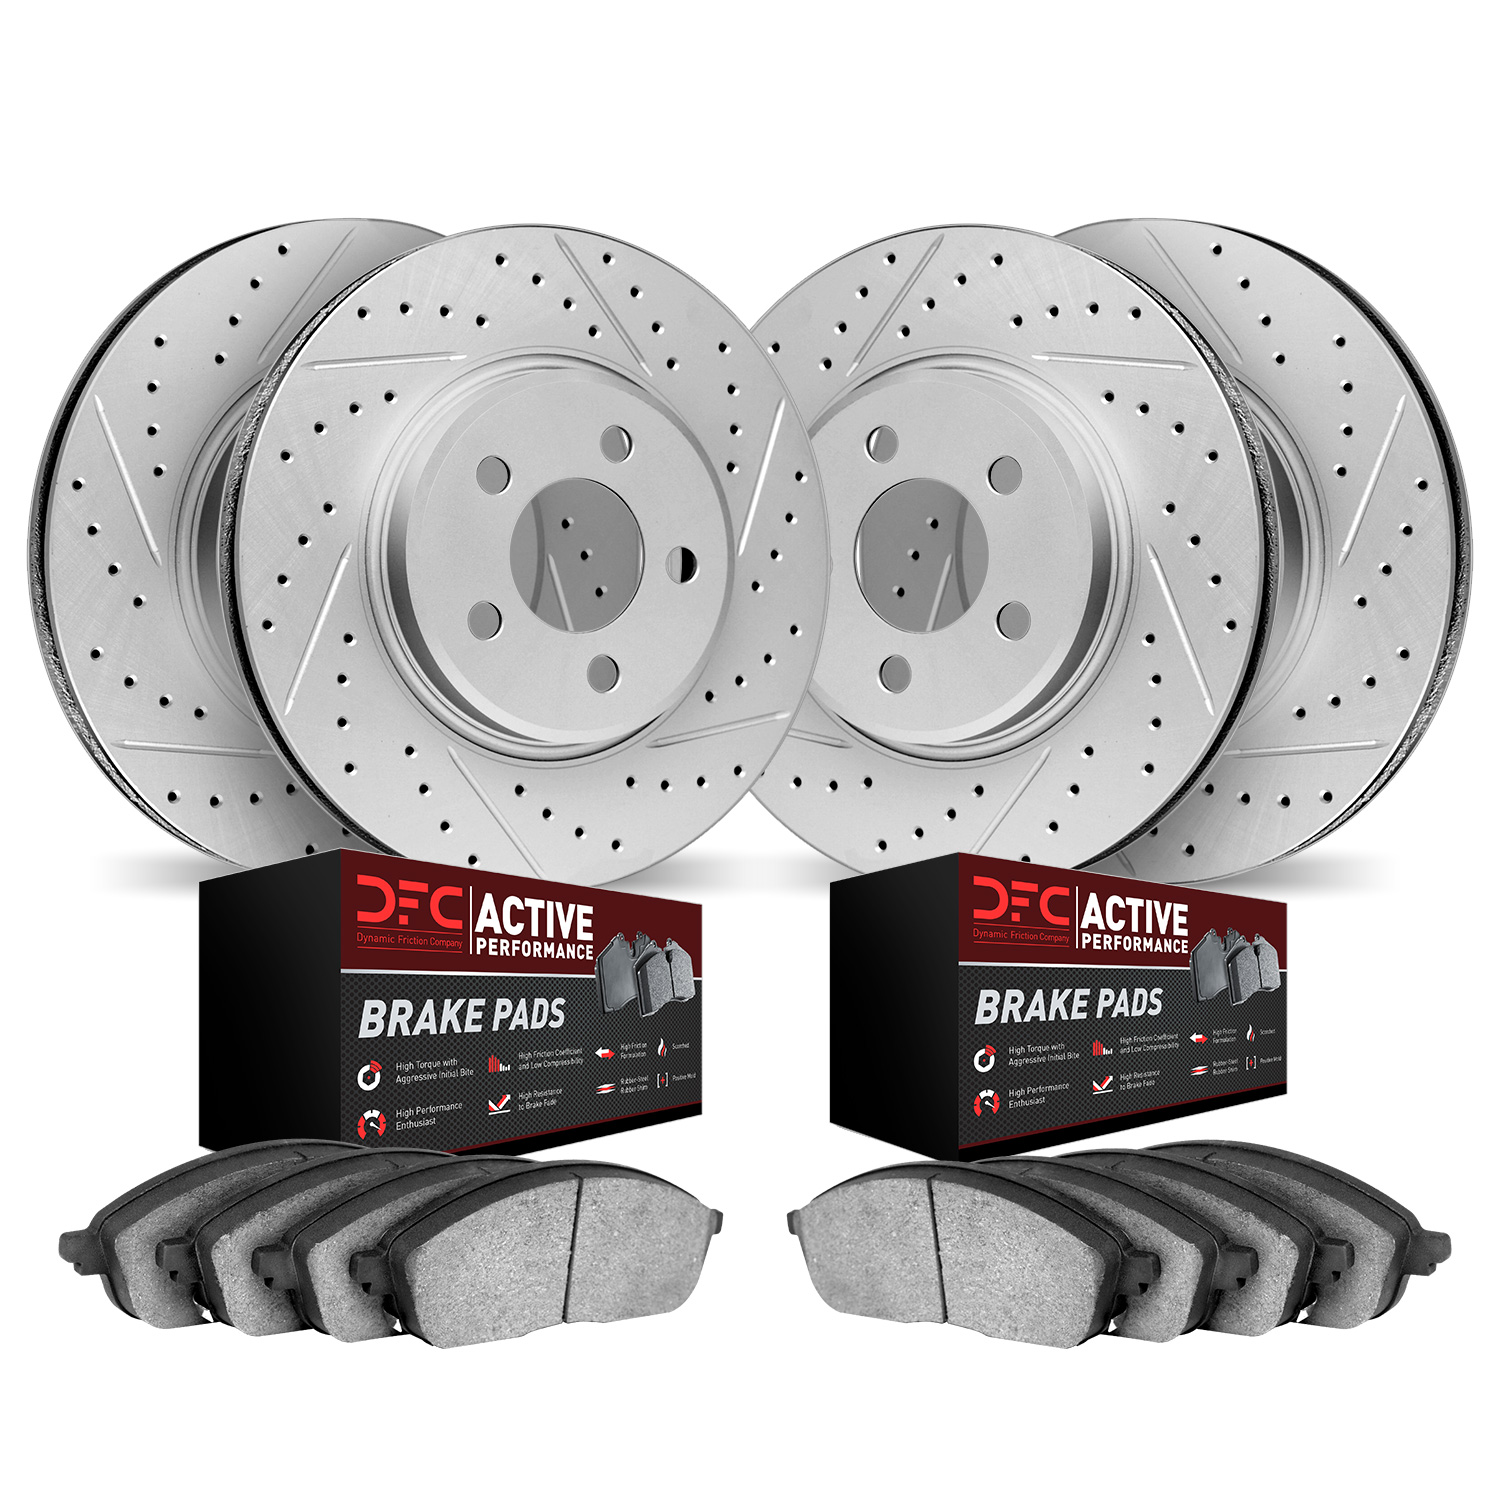 2704-31036 Geoperformance Drilled/Slotted Brake Rotors with Active Performance Pads Kit, 1999-2006 BMW, Position: Front and Rear